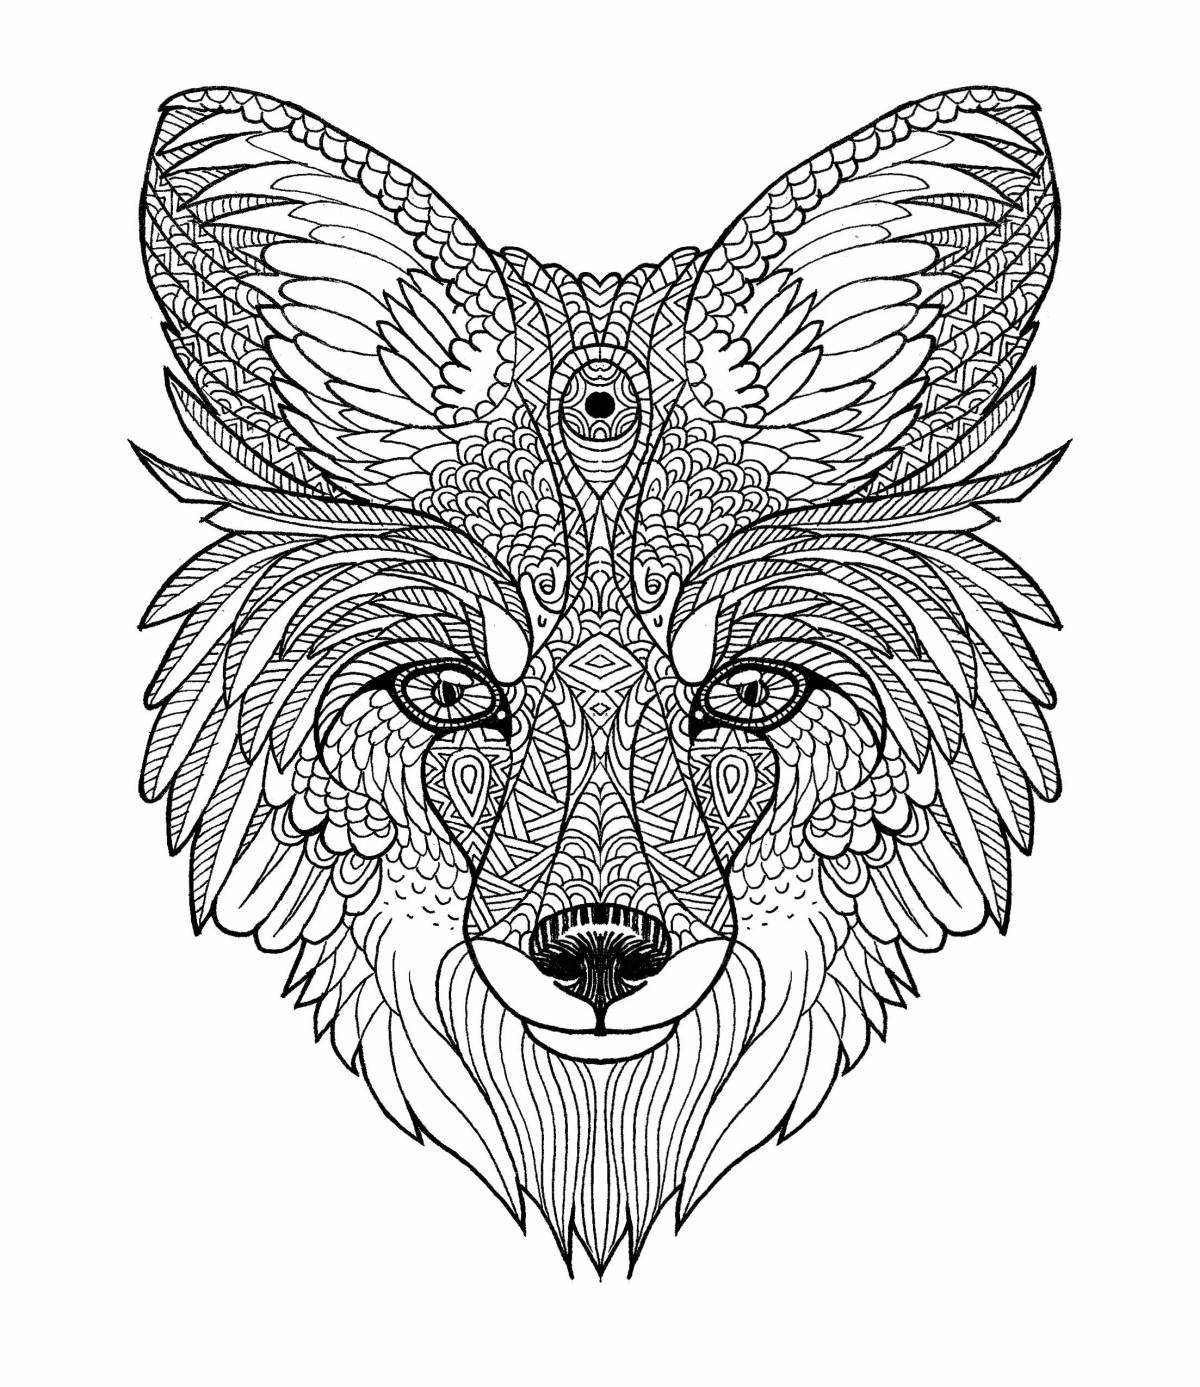 Violent fox coloring book for adults